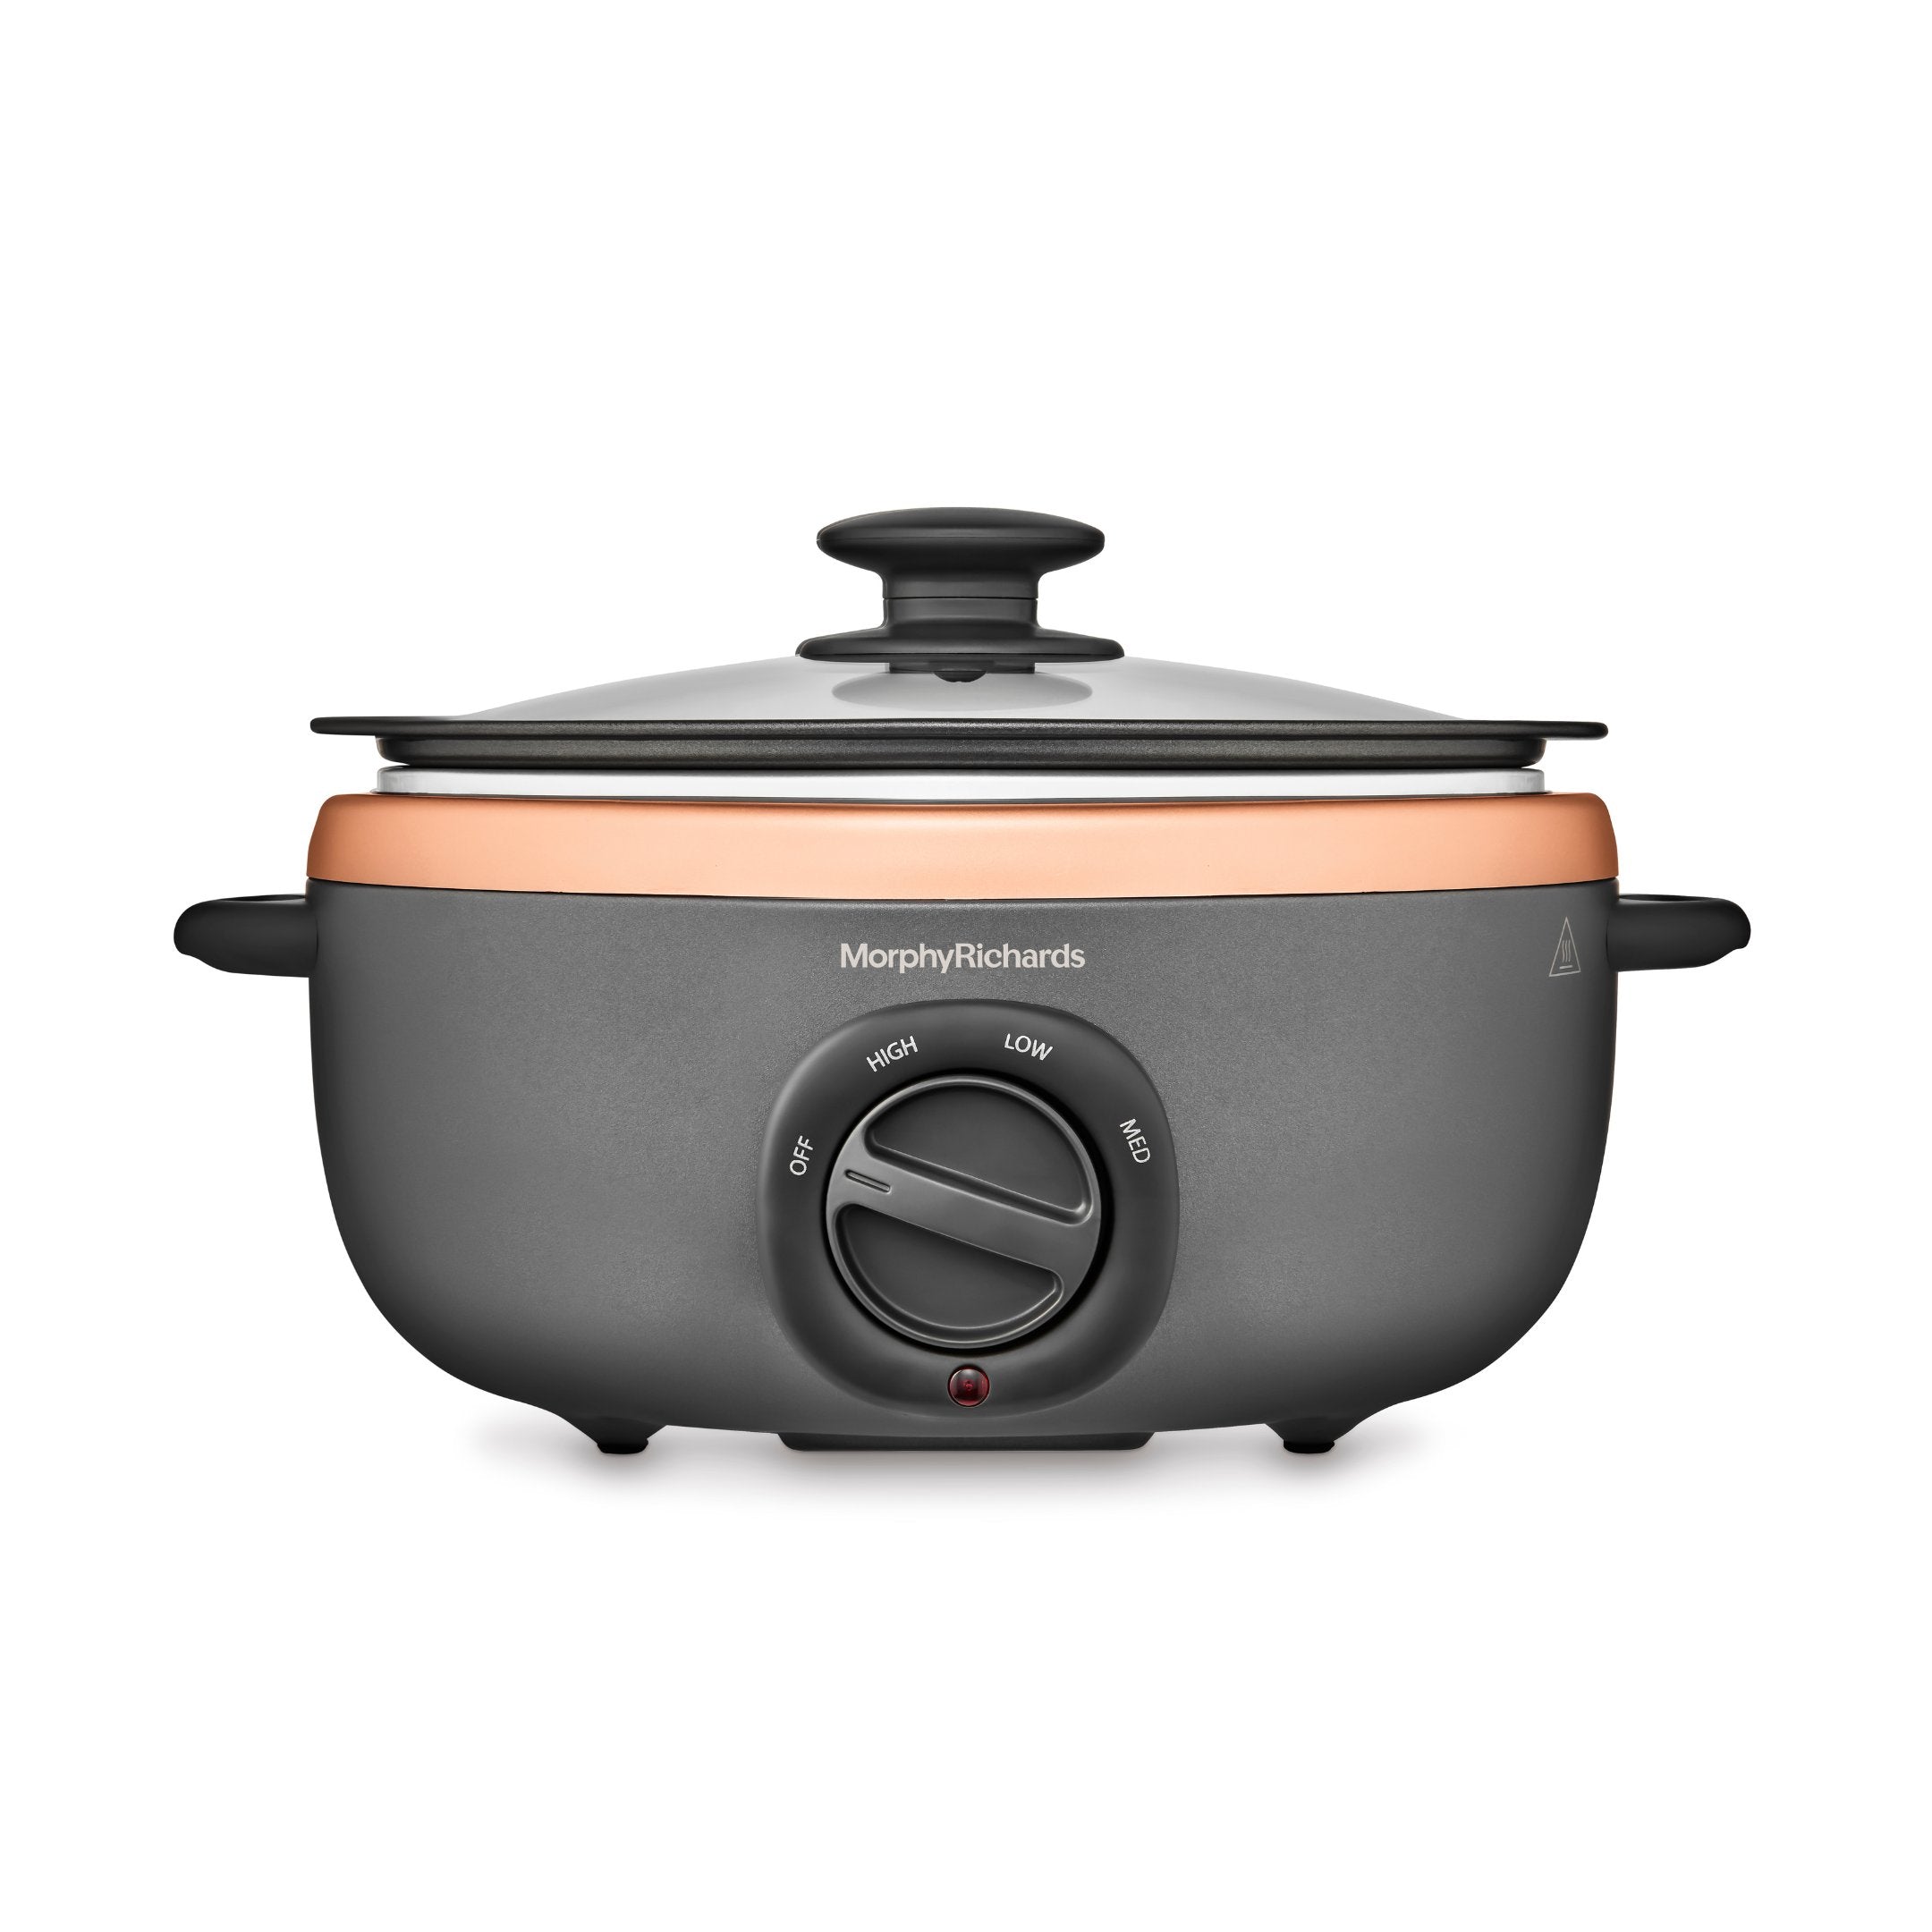 Buy Morphy Richards Compact Square Slow Cooker 460751 Black Slow Cooker  Online in UAE